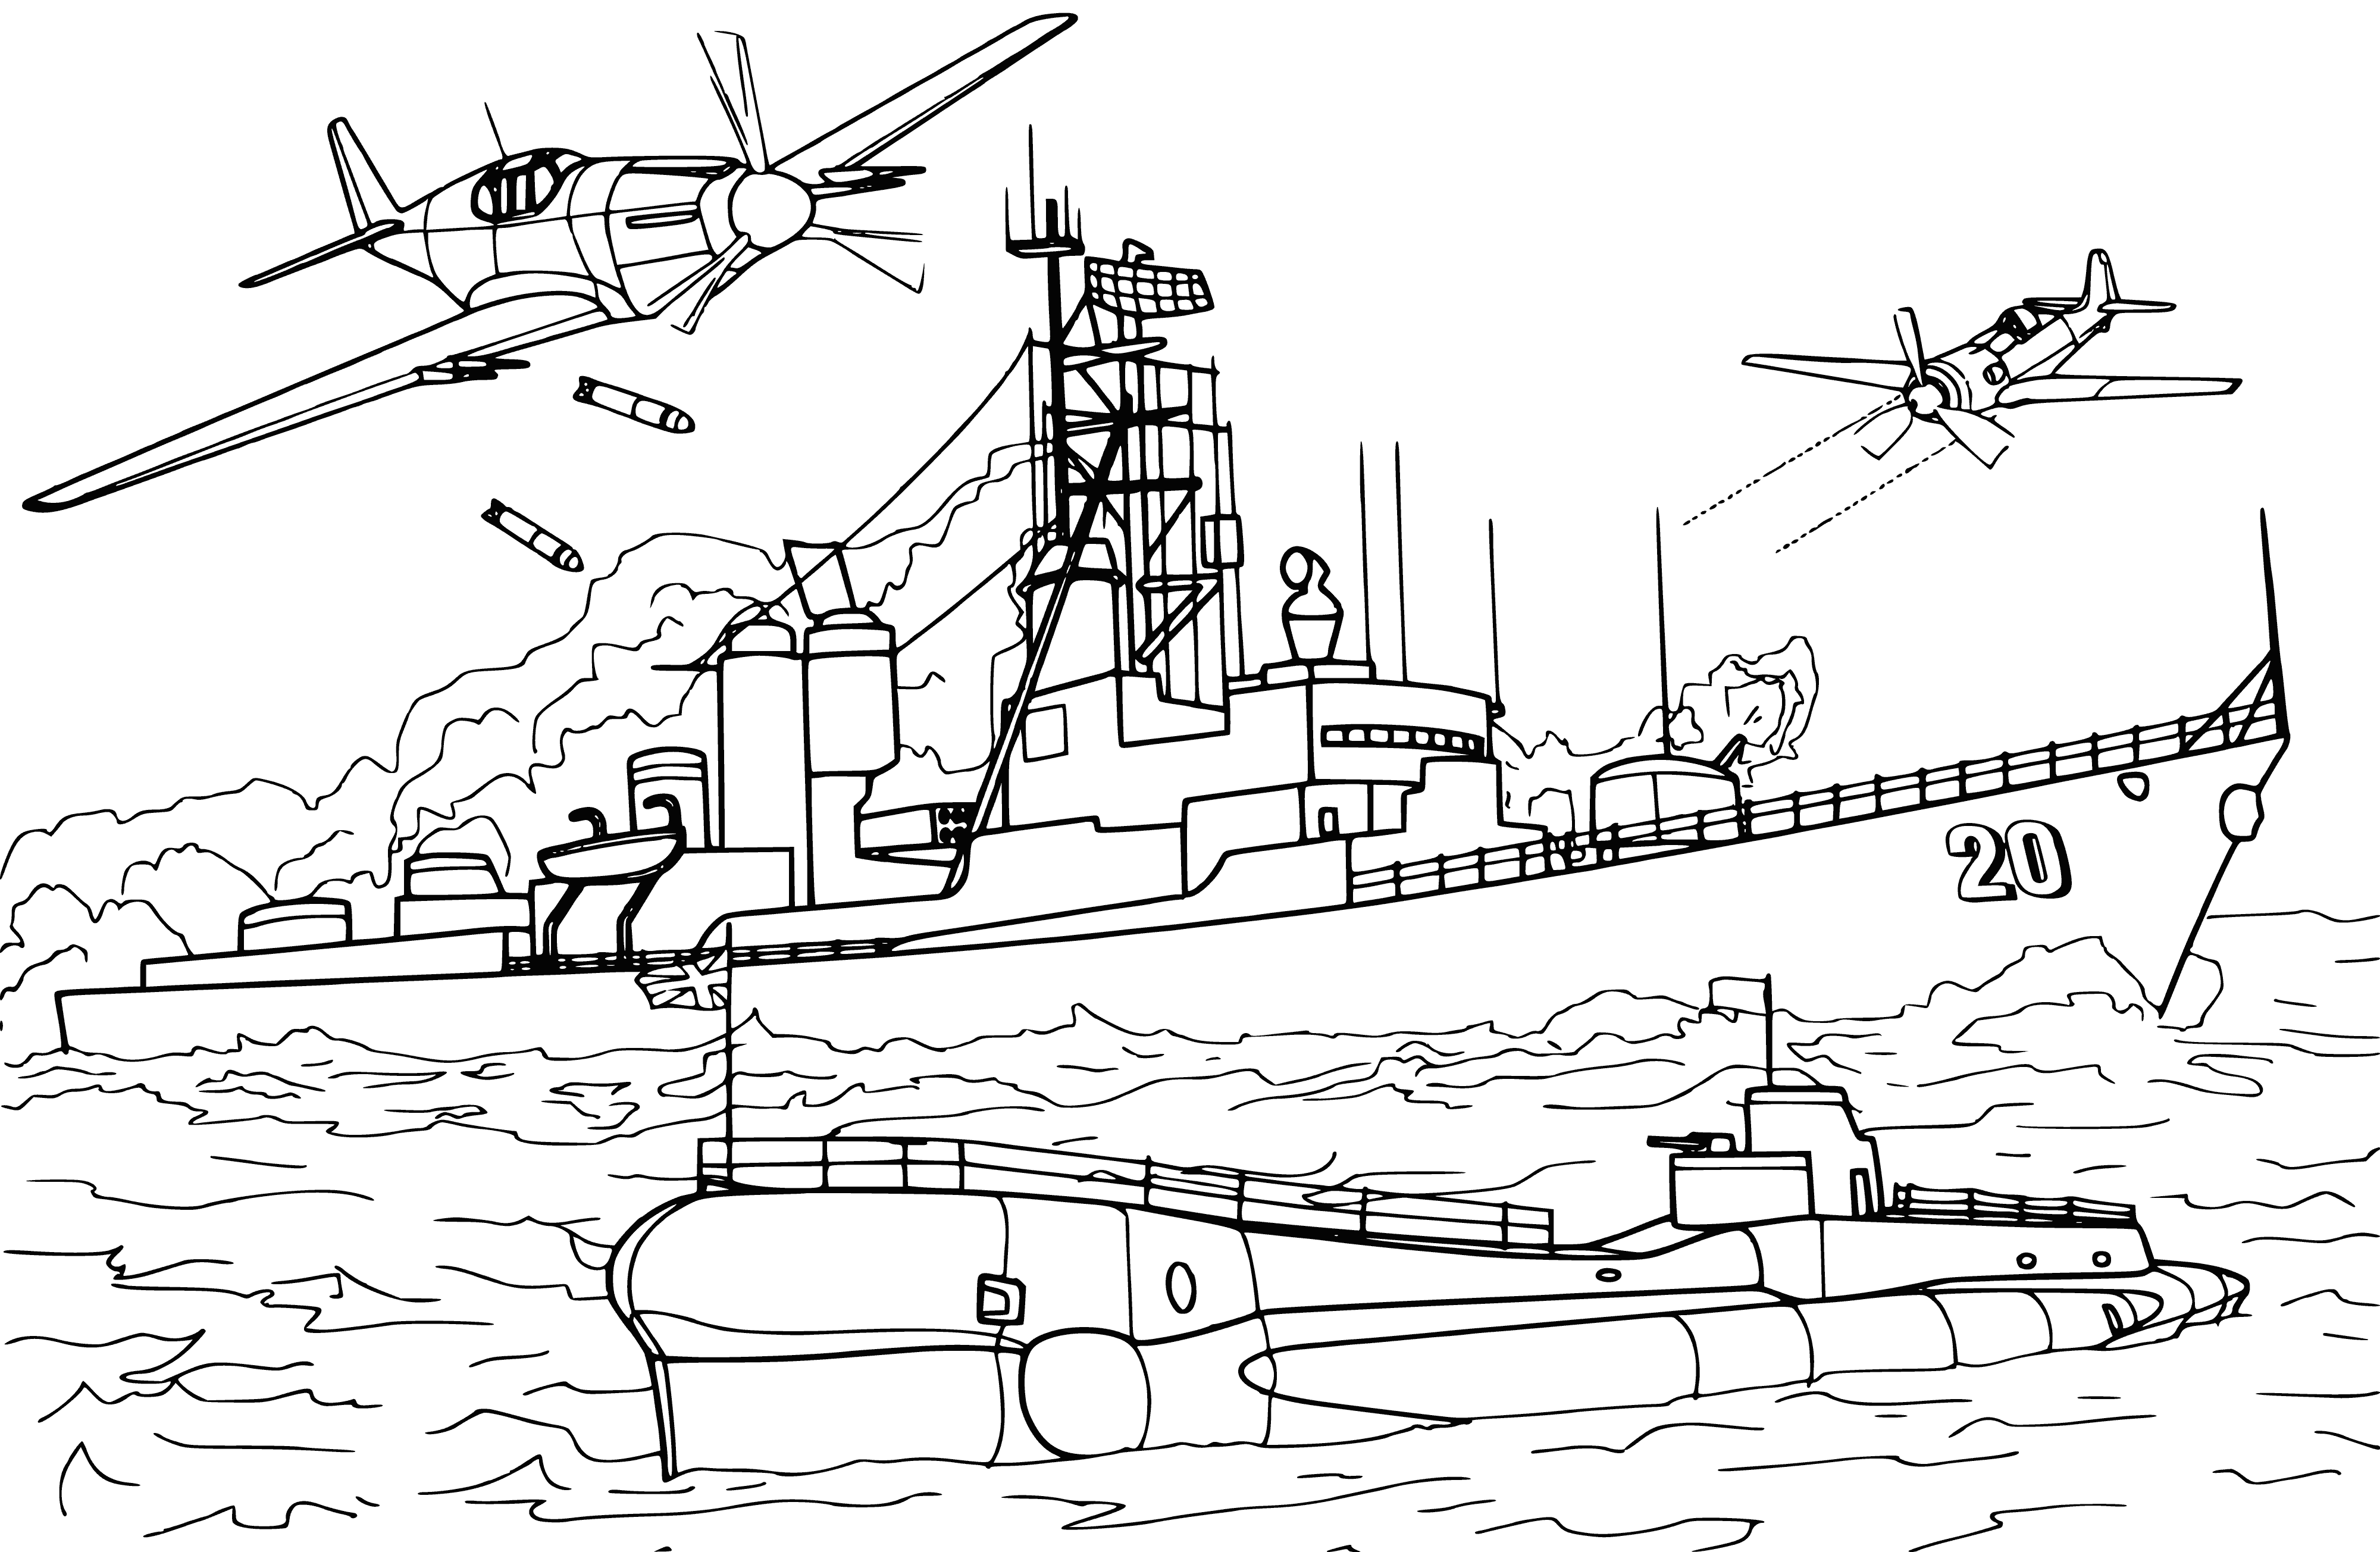 coloring page: Coloring page shows a US Navy destroyer sailing on the water with 3 tall smoke stacks, large guns, and several smaller boats.